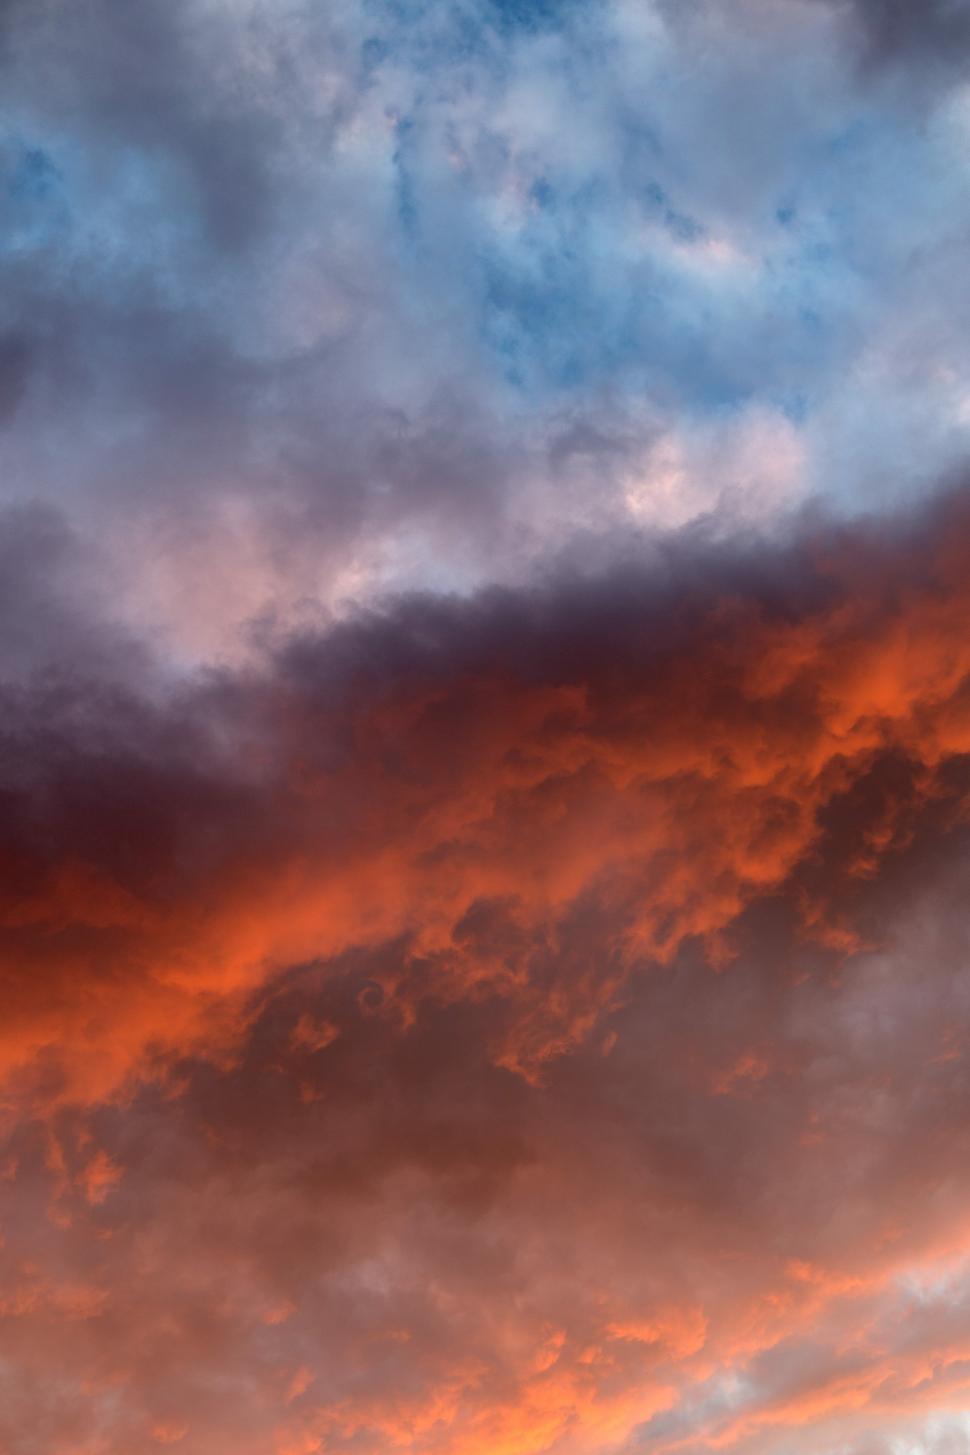 Free Image of A cloudy sky with orange and blue clouds 